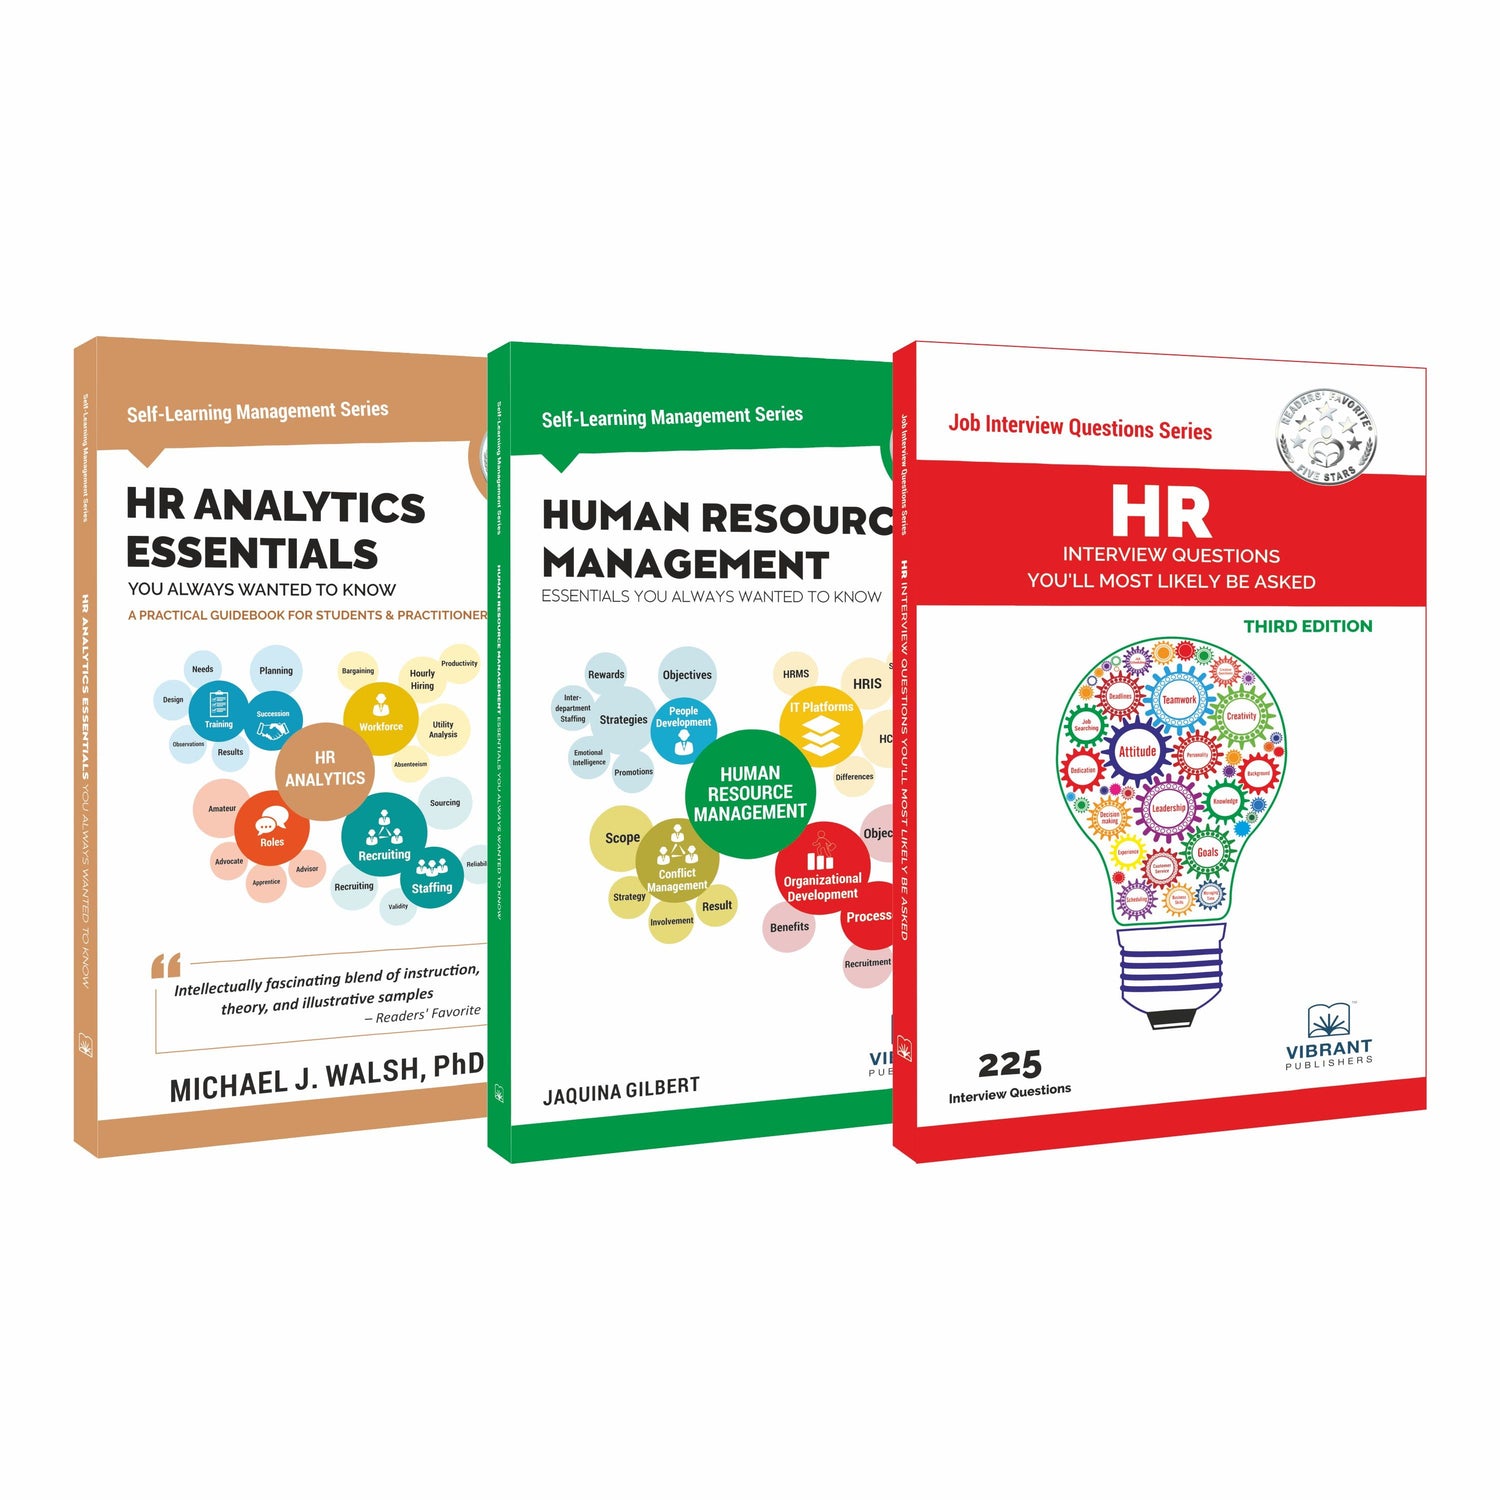 Human Resource Professional BIBLE – MASTER THE SKILLS YOU NEED TO WIN THE NEXT HR POSITION – Includes Strategies, Analysis & 200+ Interview Questions